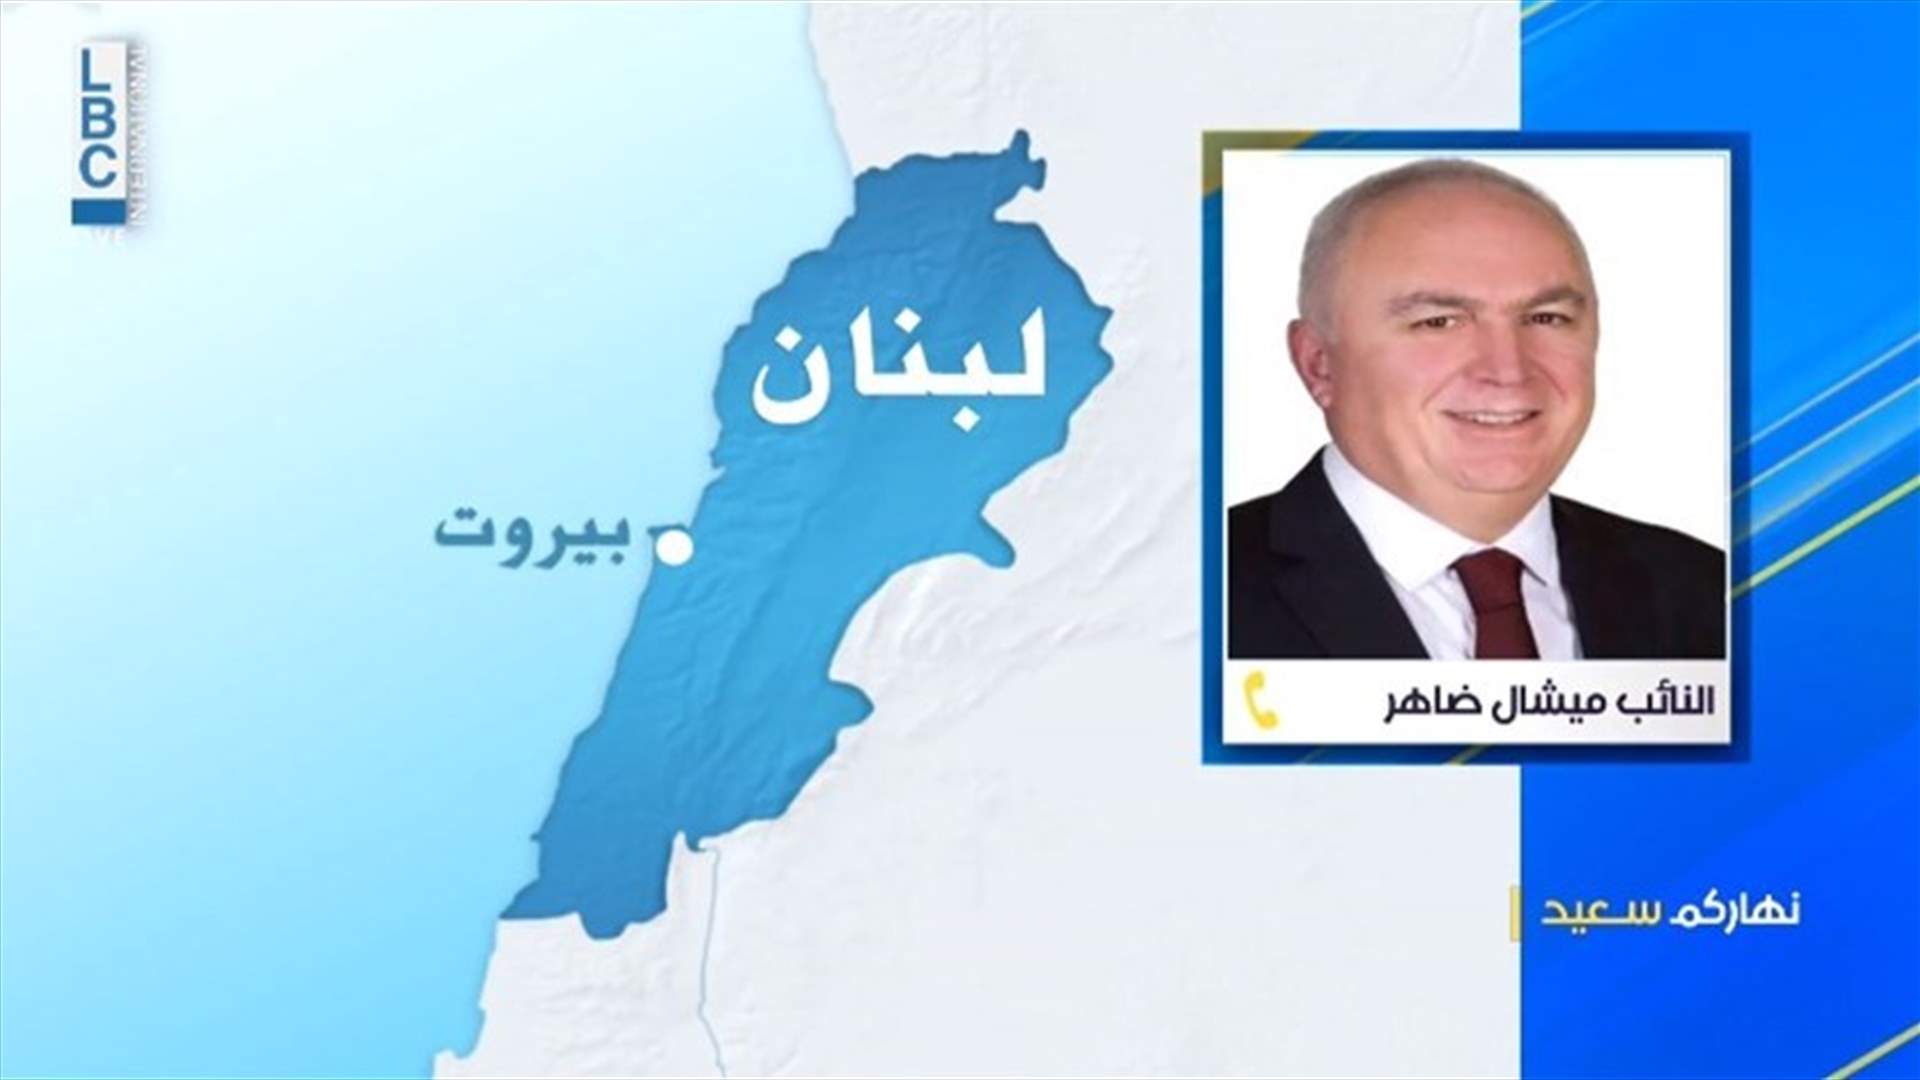 Daher to LBCI: Lebanon to have the highest rate of inflation in 2022